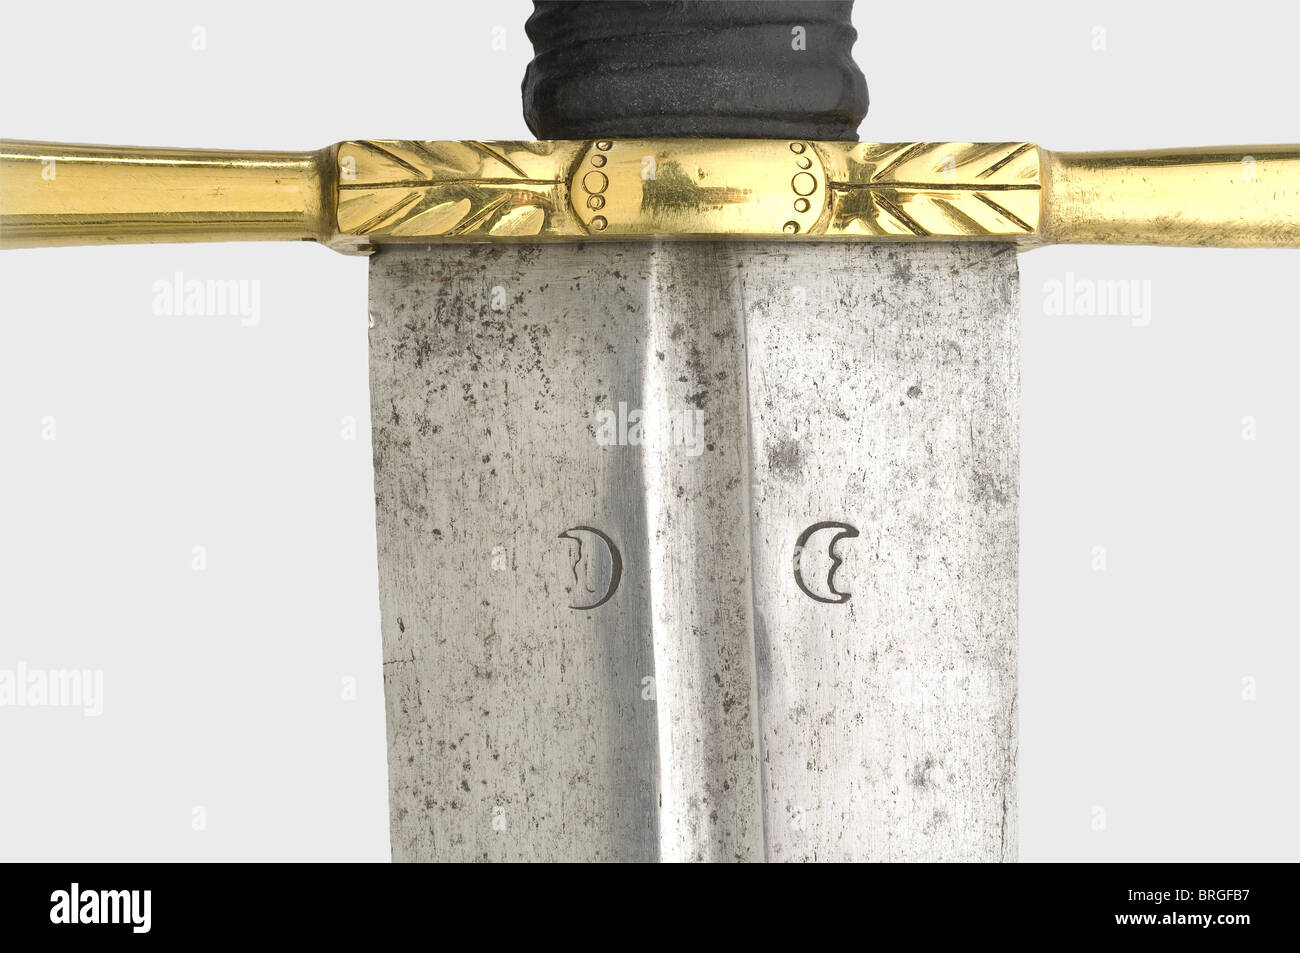 A German executioner's sword,circa 1700 Broad double-edged blade with a rounded point. Narrow fullers on the upper half,and a crescent moon mark stamped on both sides at the base of the blade. Brass quillons with chased decoration. Replacement leather grip cover. Faceted brass pommel,the upper half is fluted and has chased ornamentation. Length 112 cm.,historic,historical,18th century,instrument of torture,torture device,instruments of torture,torture devices,object,objects,stills,clipping,clippings,cut out,cut-out,cut-outs,thrusting,thrusti,Additional-Rights-Clearences-Not Available Stock Photo